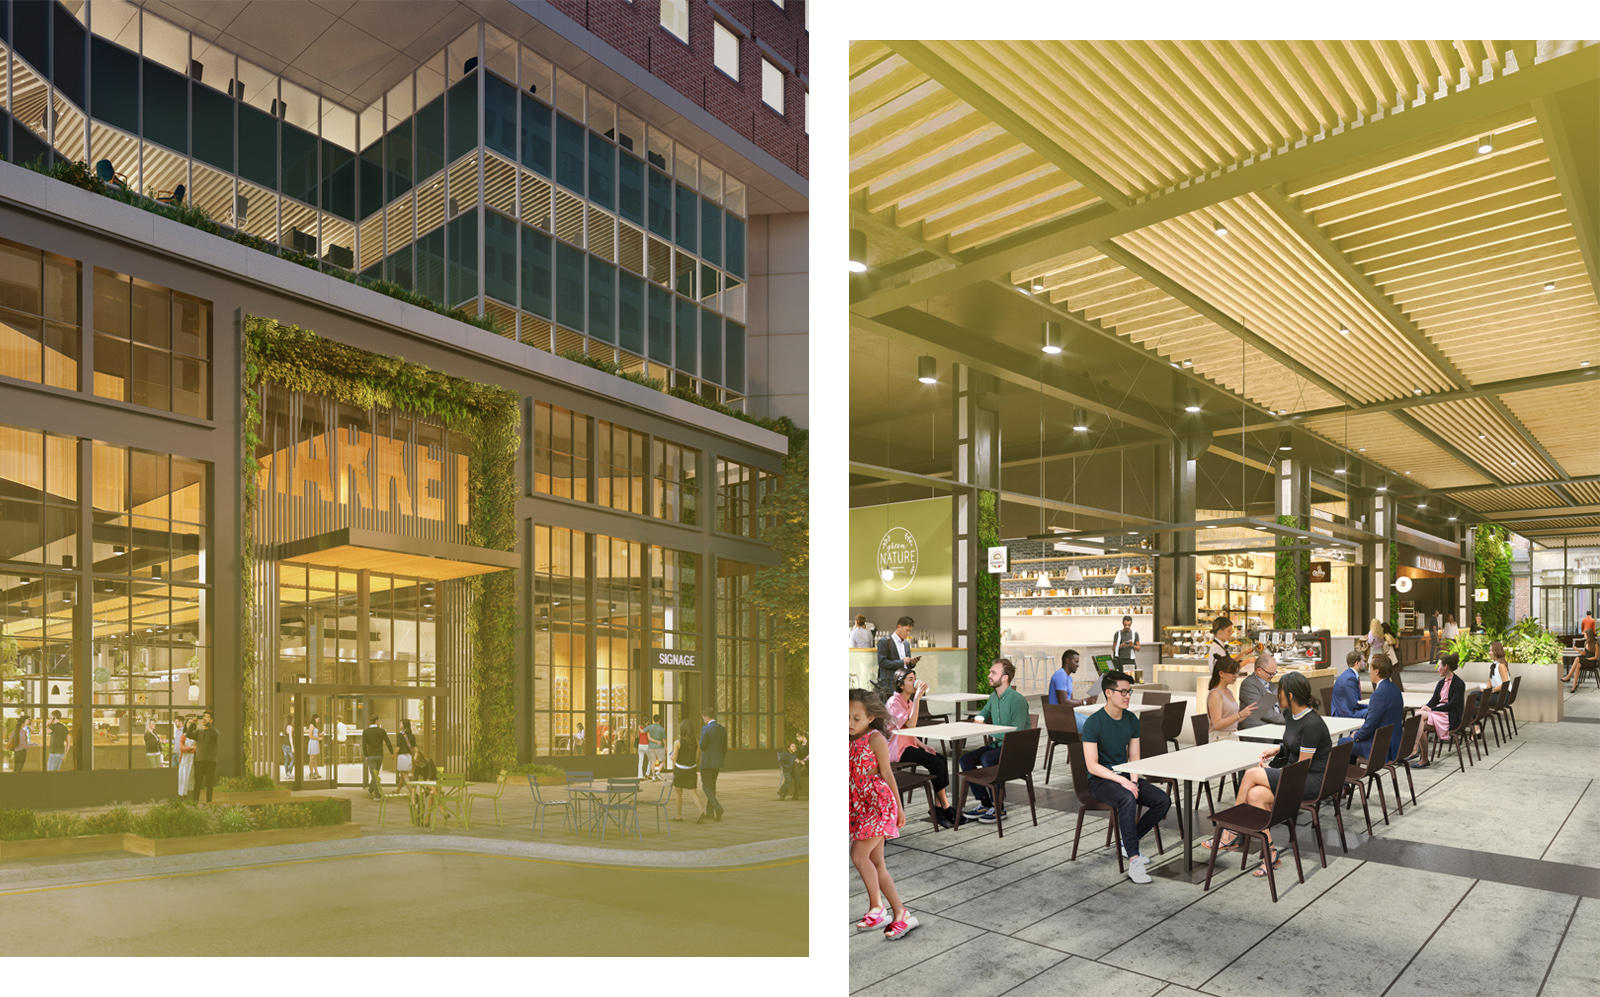 Interior and exterior renderings courtesy of Urbanspace.